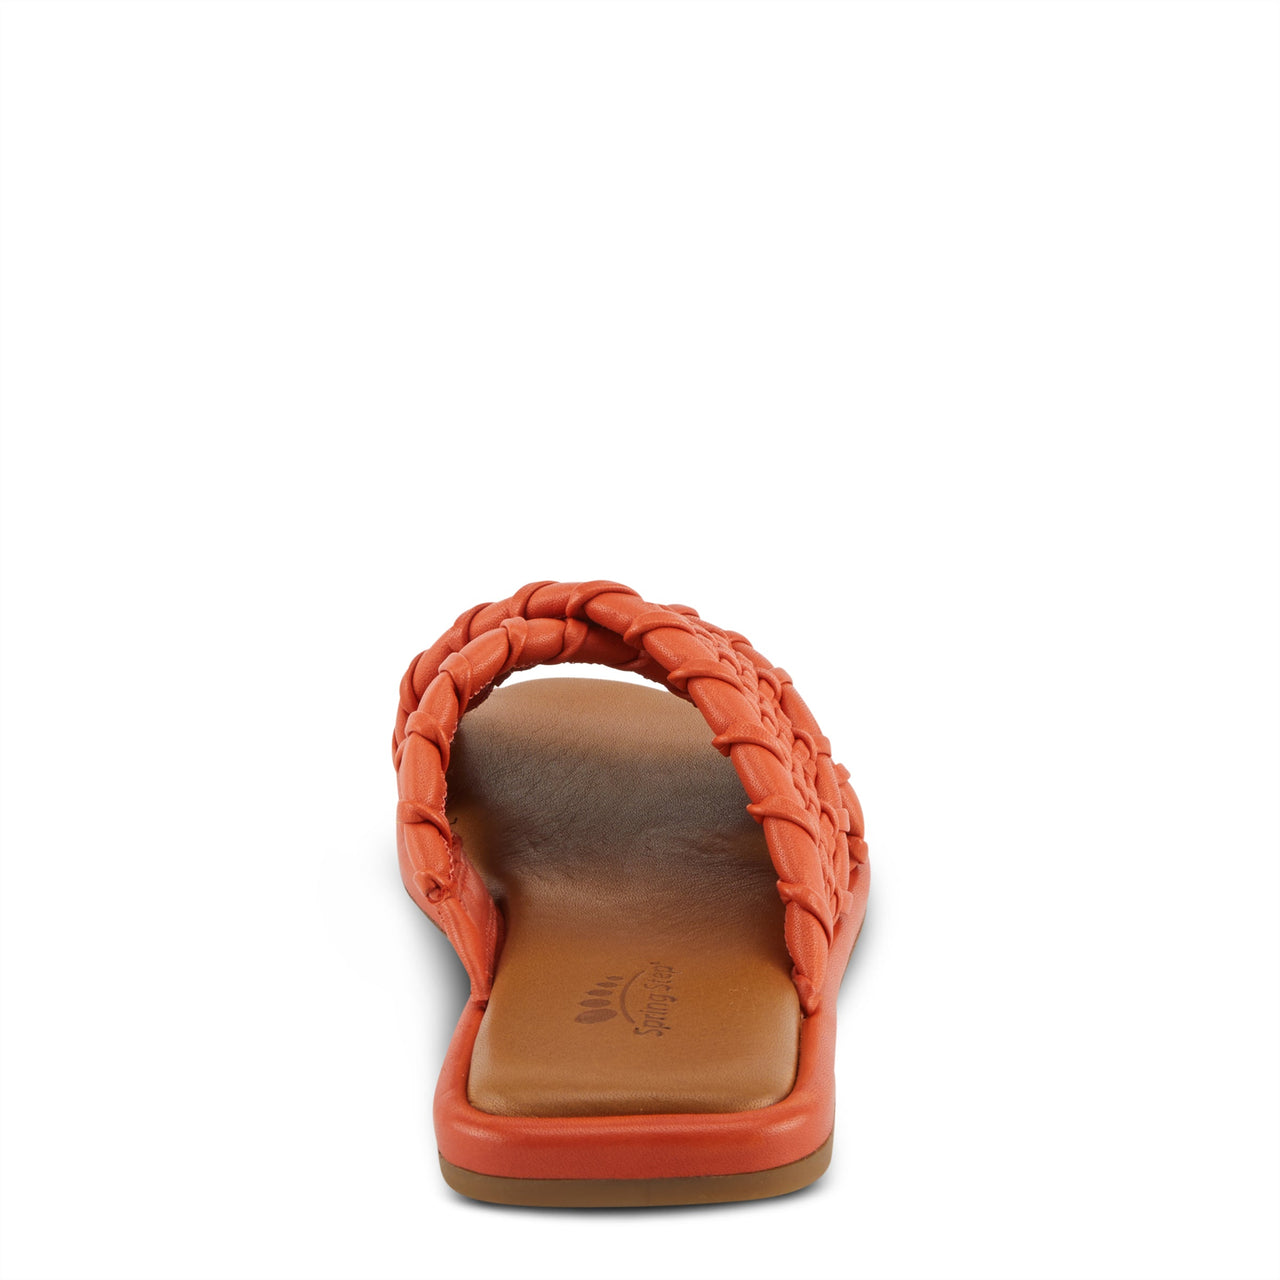 Stylish and comfortable Spring Step Montauk Sandals in brown leather